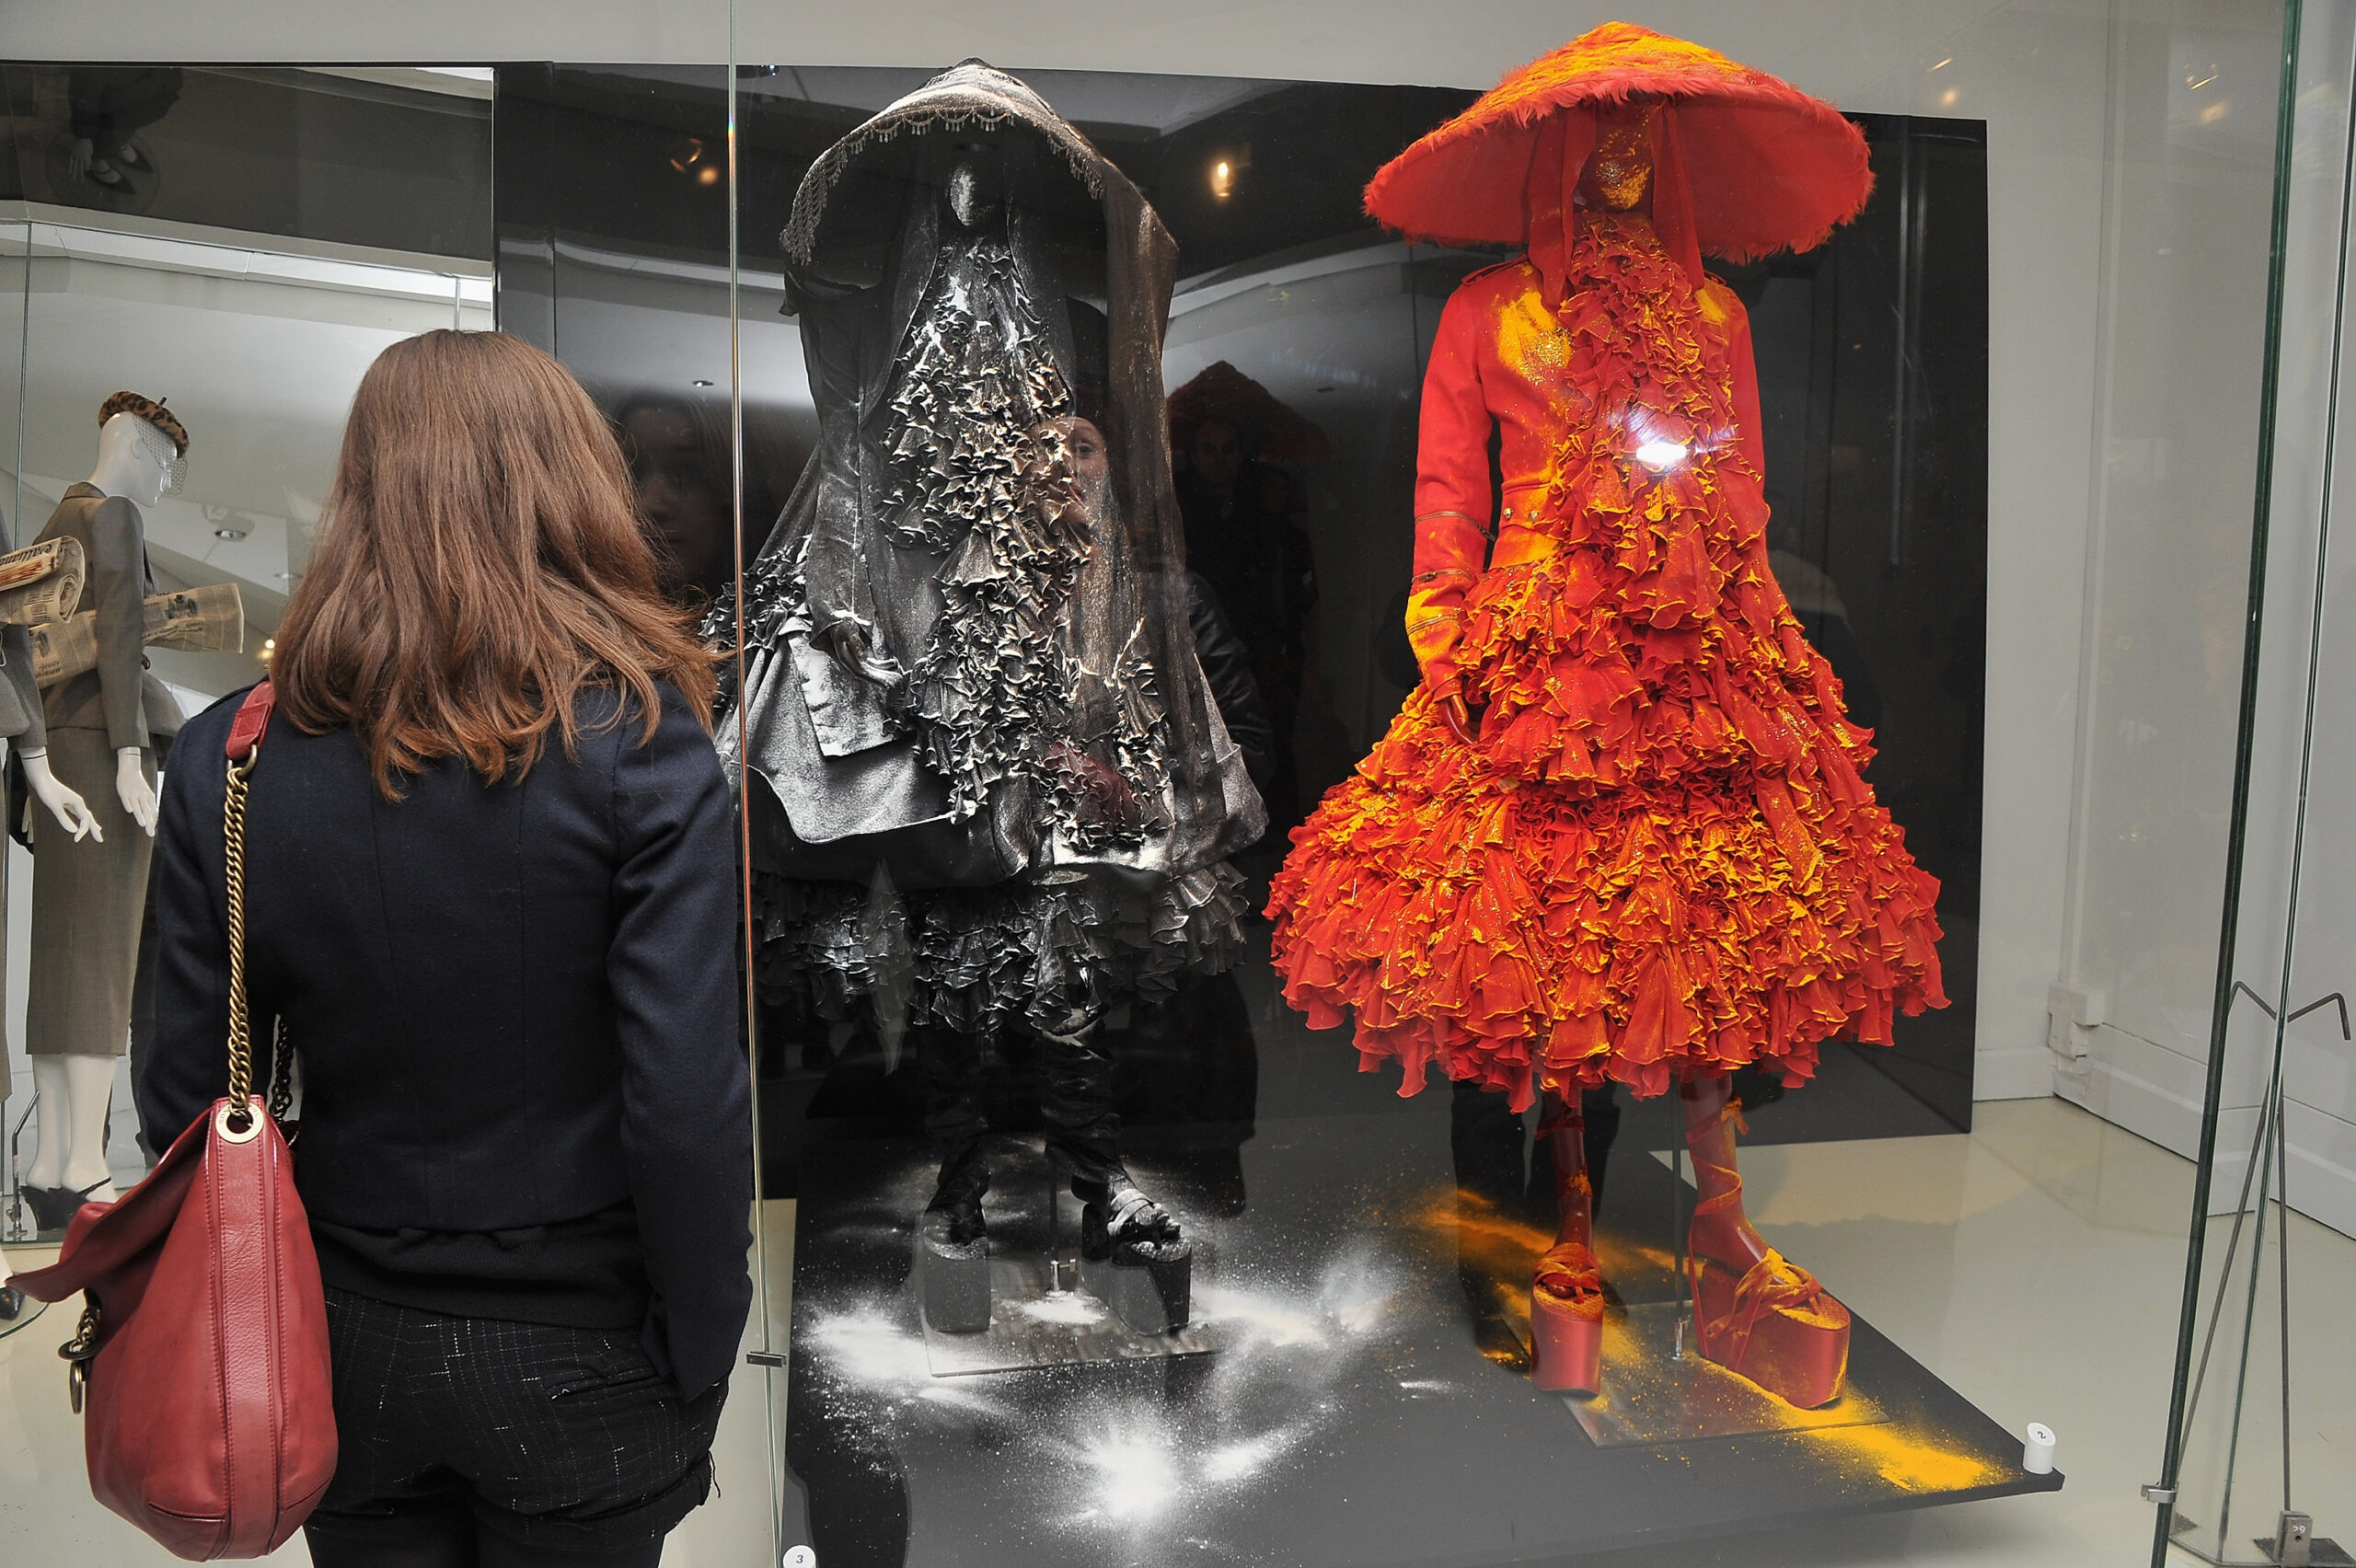 PARIS - NOVEMBER 24: A Visitor looks at Christian Dior dresses designed by John Galiano are displayed at Musee Des Arts Decoratifs on November 24, 2010 in Paris, France. (Photo by Pascal Le Segretain/Getty Images for Reebok)